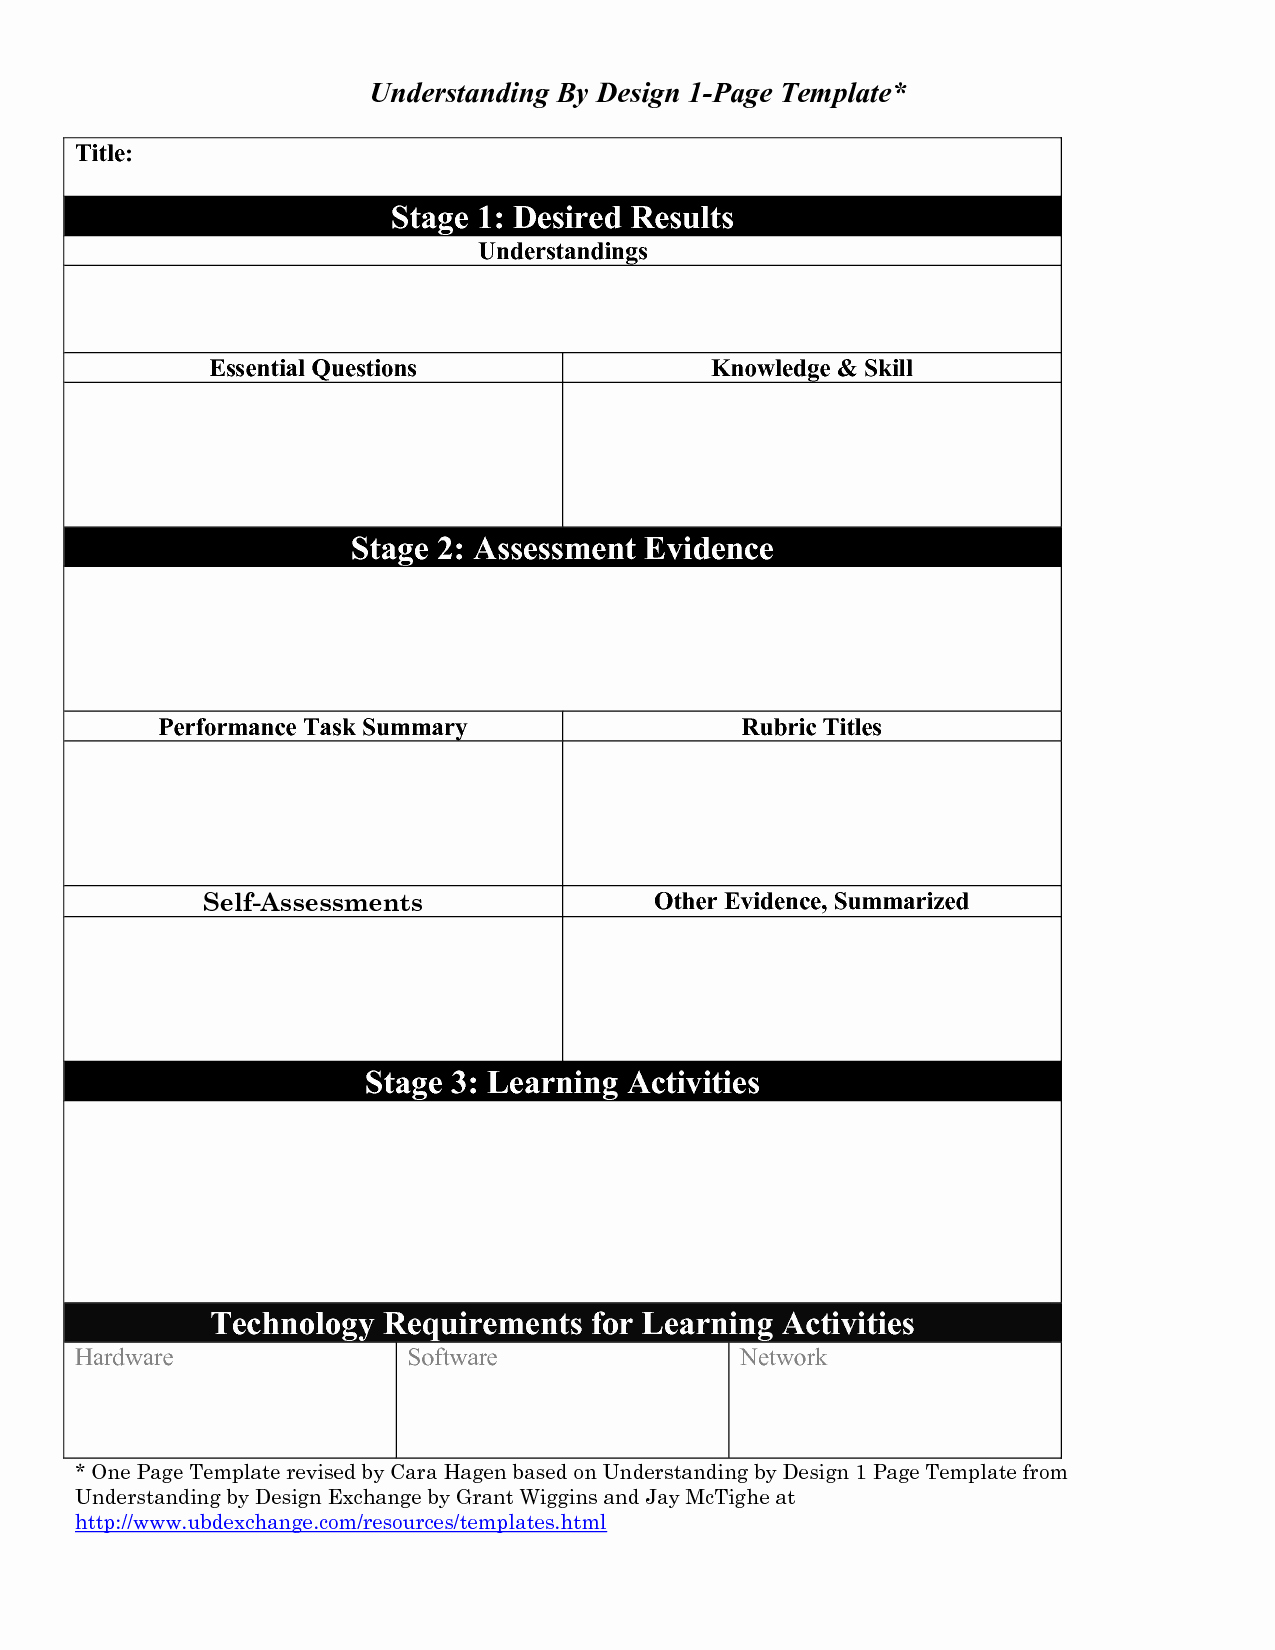 Backwards Lesson Planning Template Lovely Understanding by Design 1 Page Template Doc Understanding